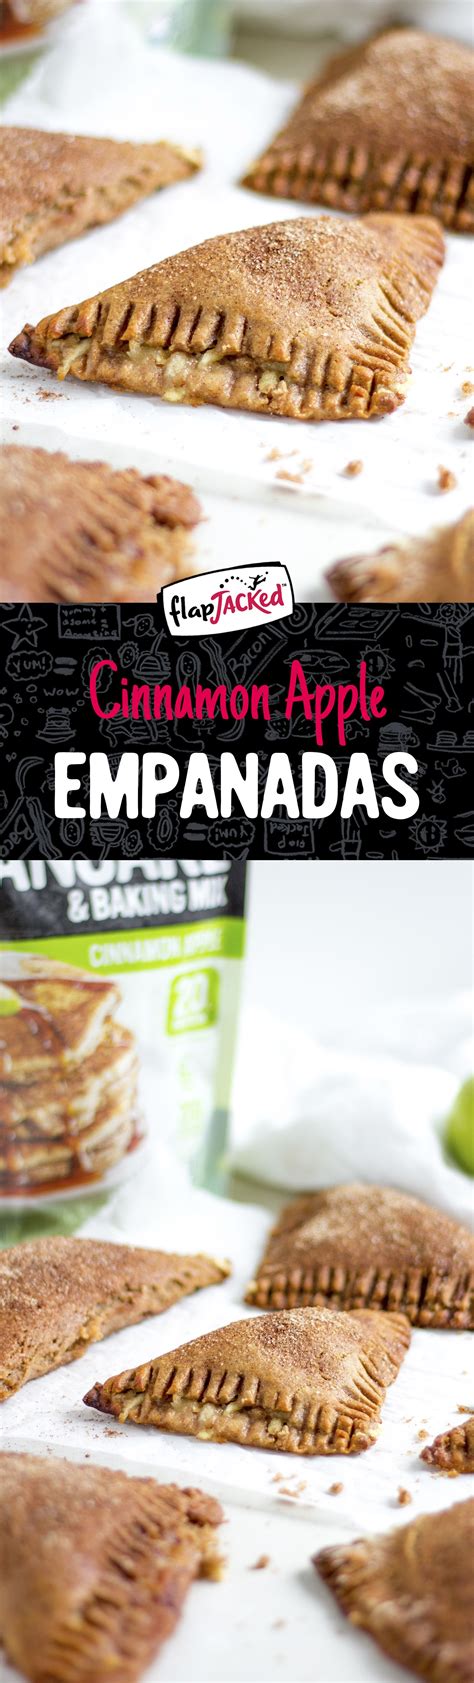 Cinnamon Apple Empanadas Are Displayed On A White Surface With The